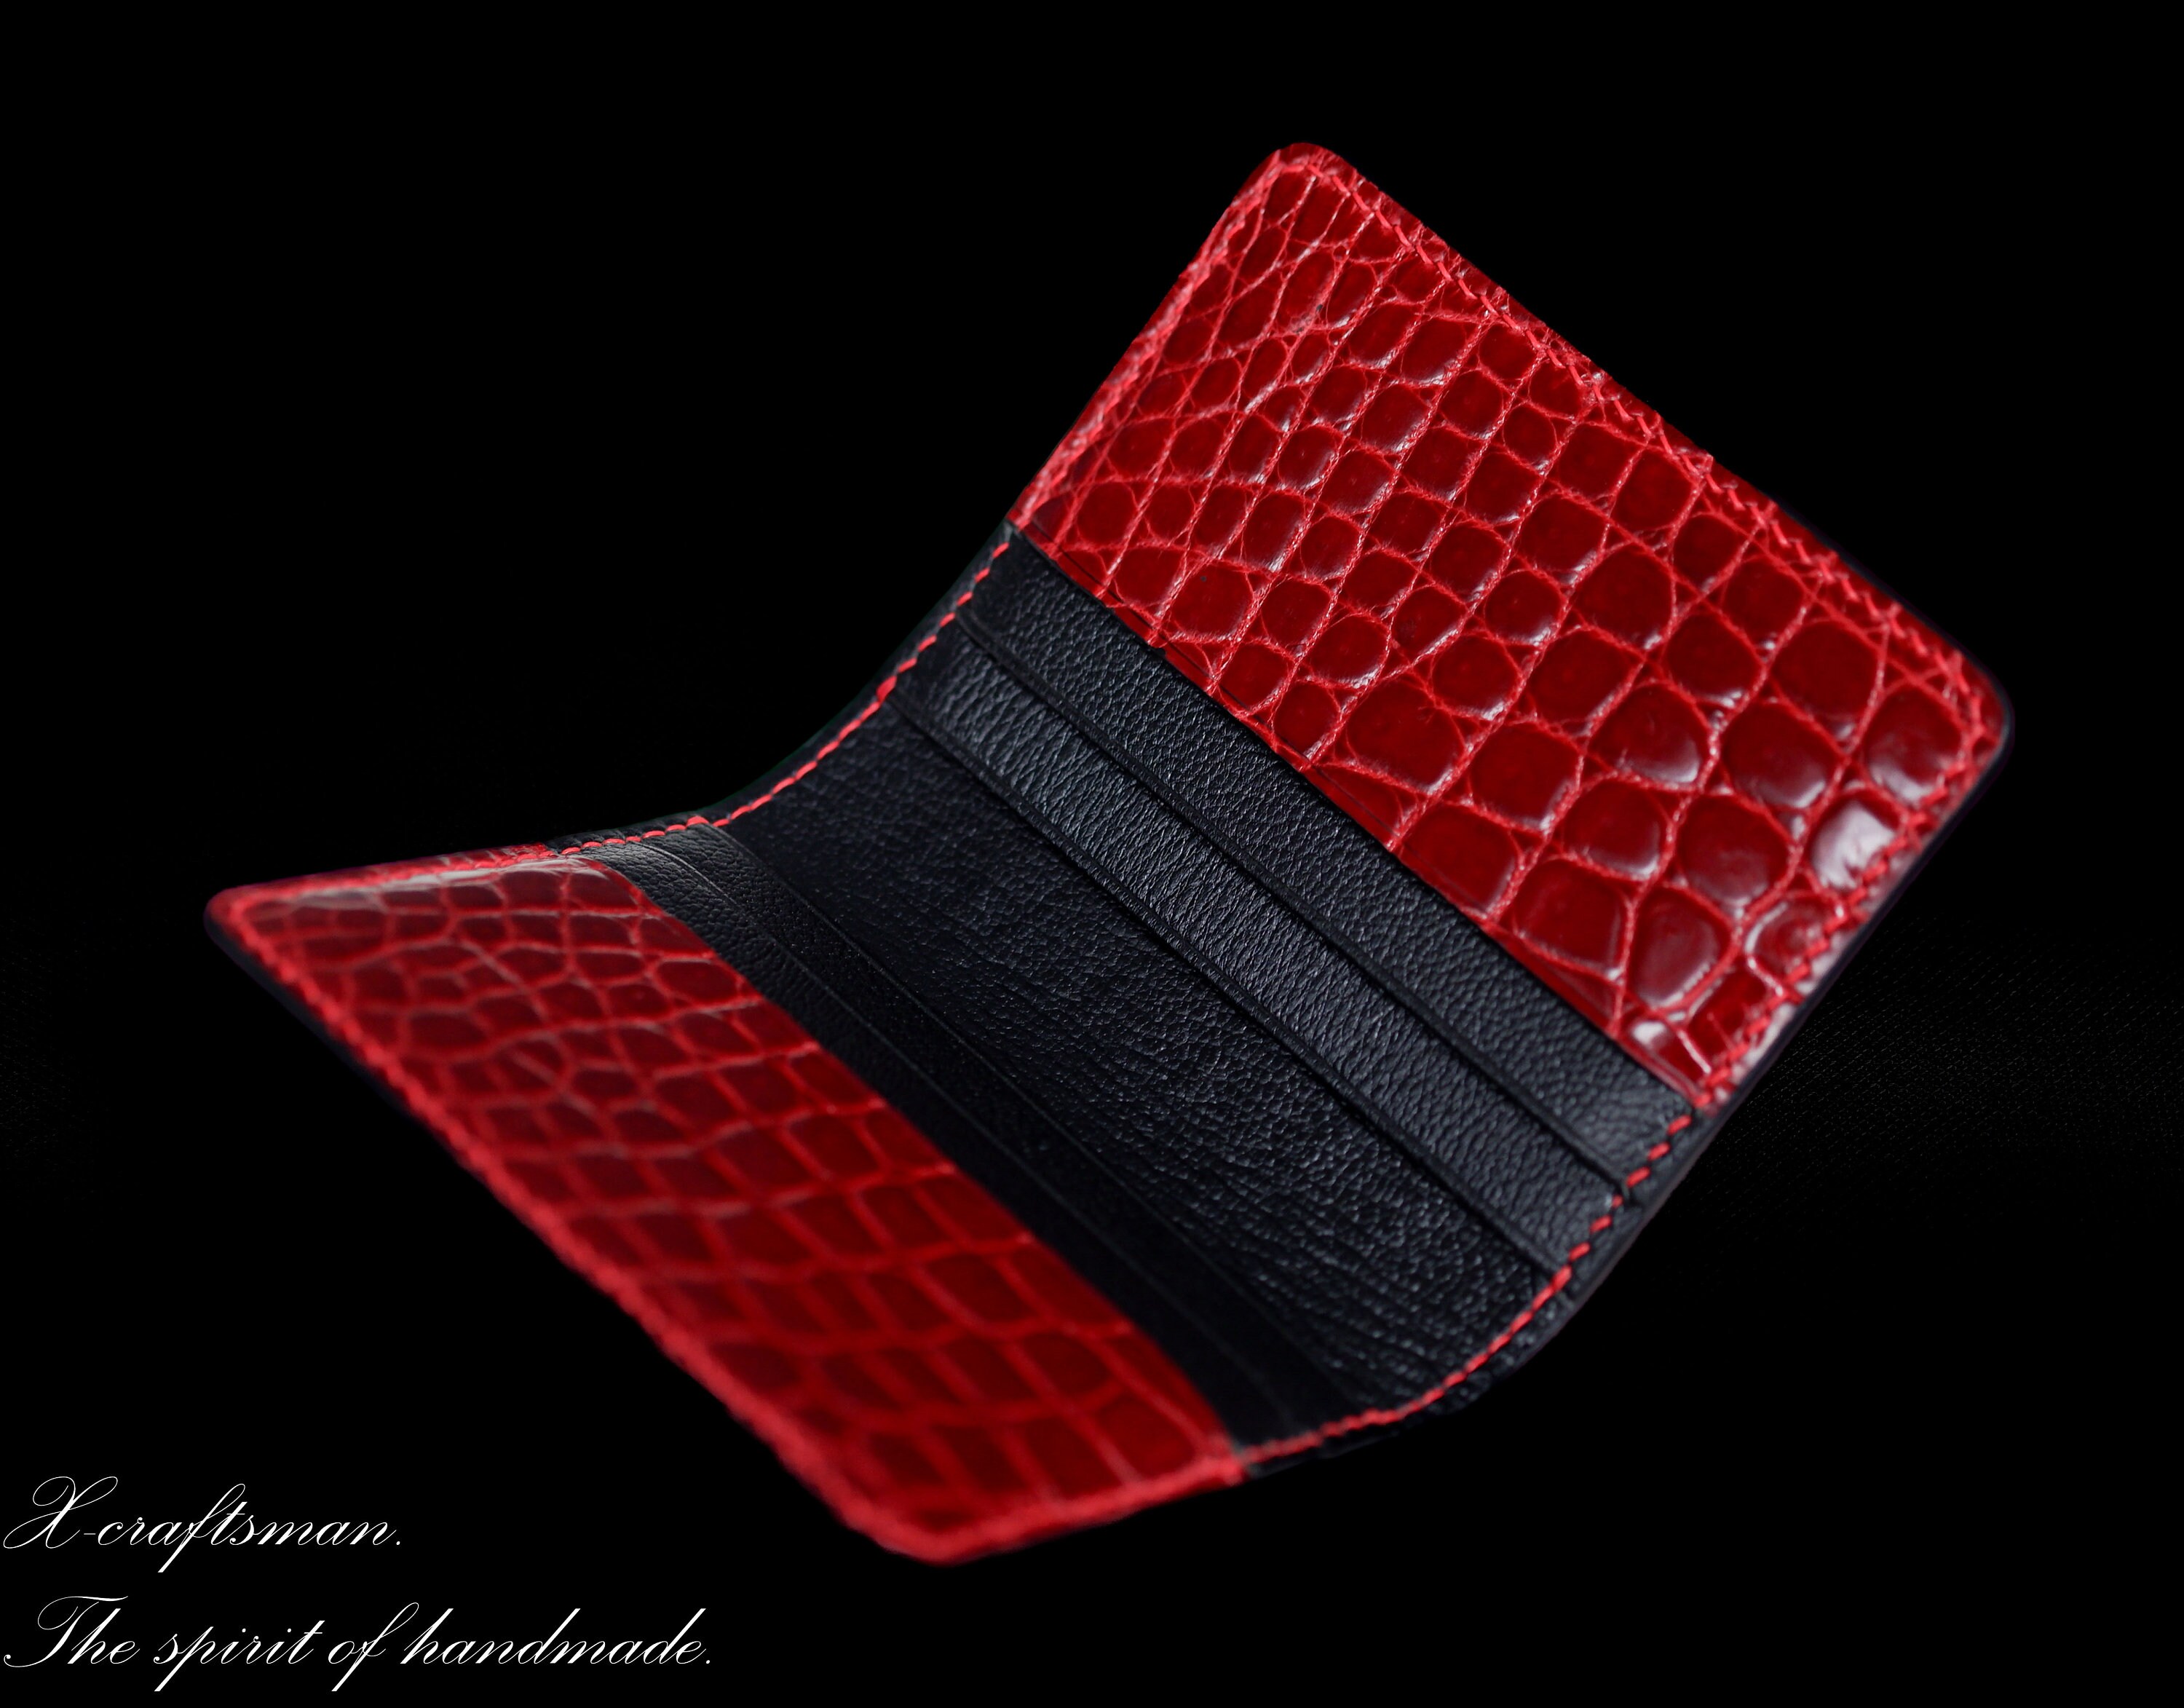 Glossy Red Credit Card Case in Real Alligator